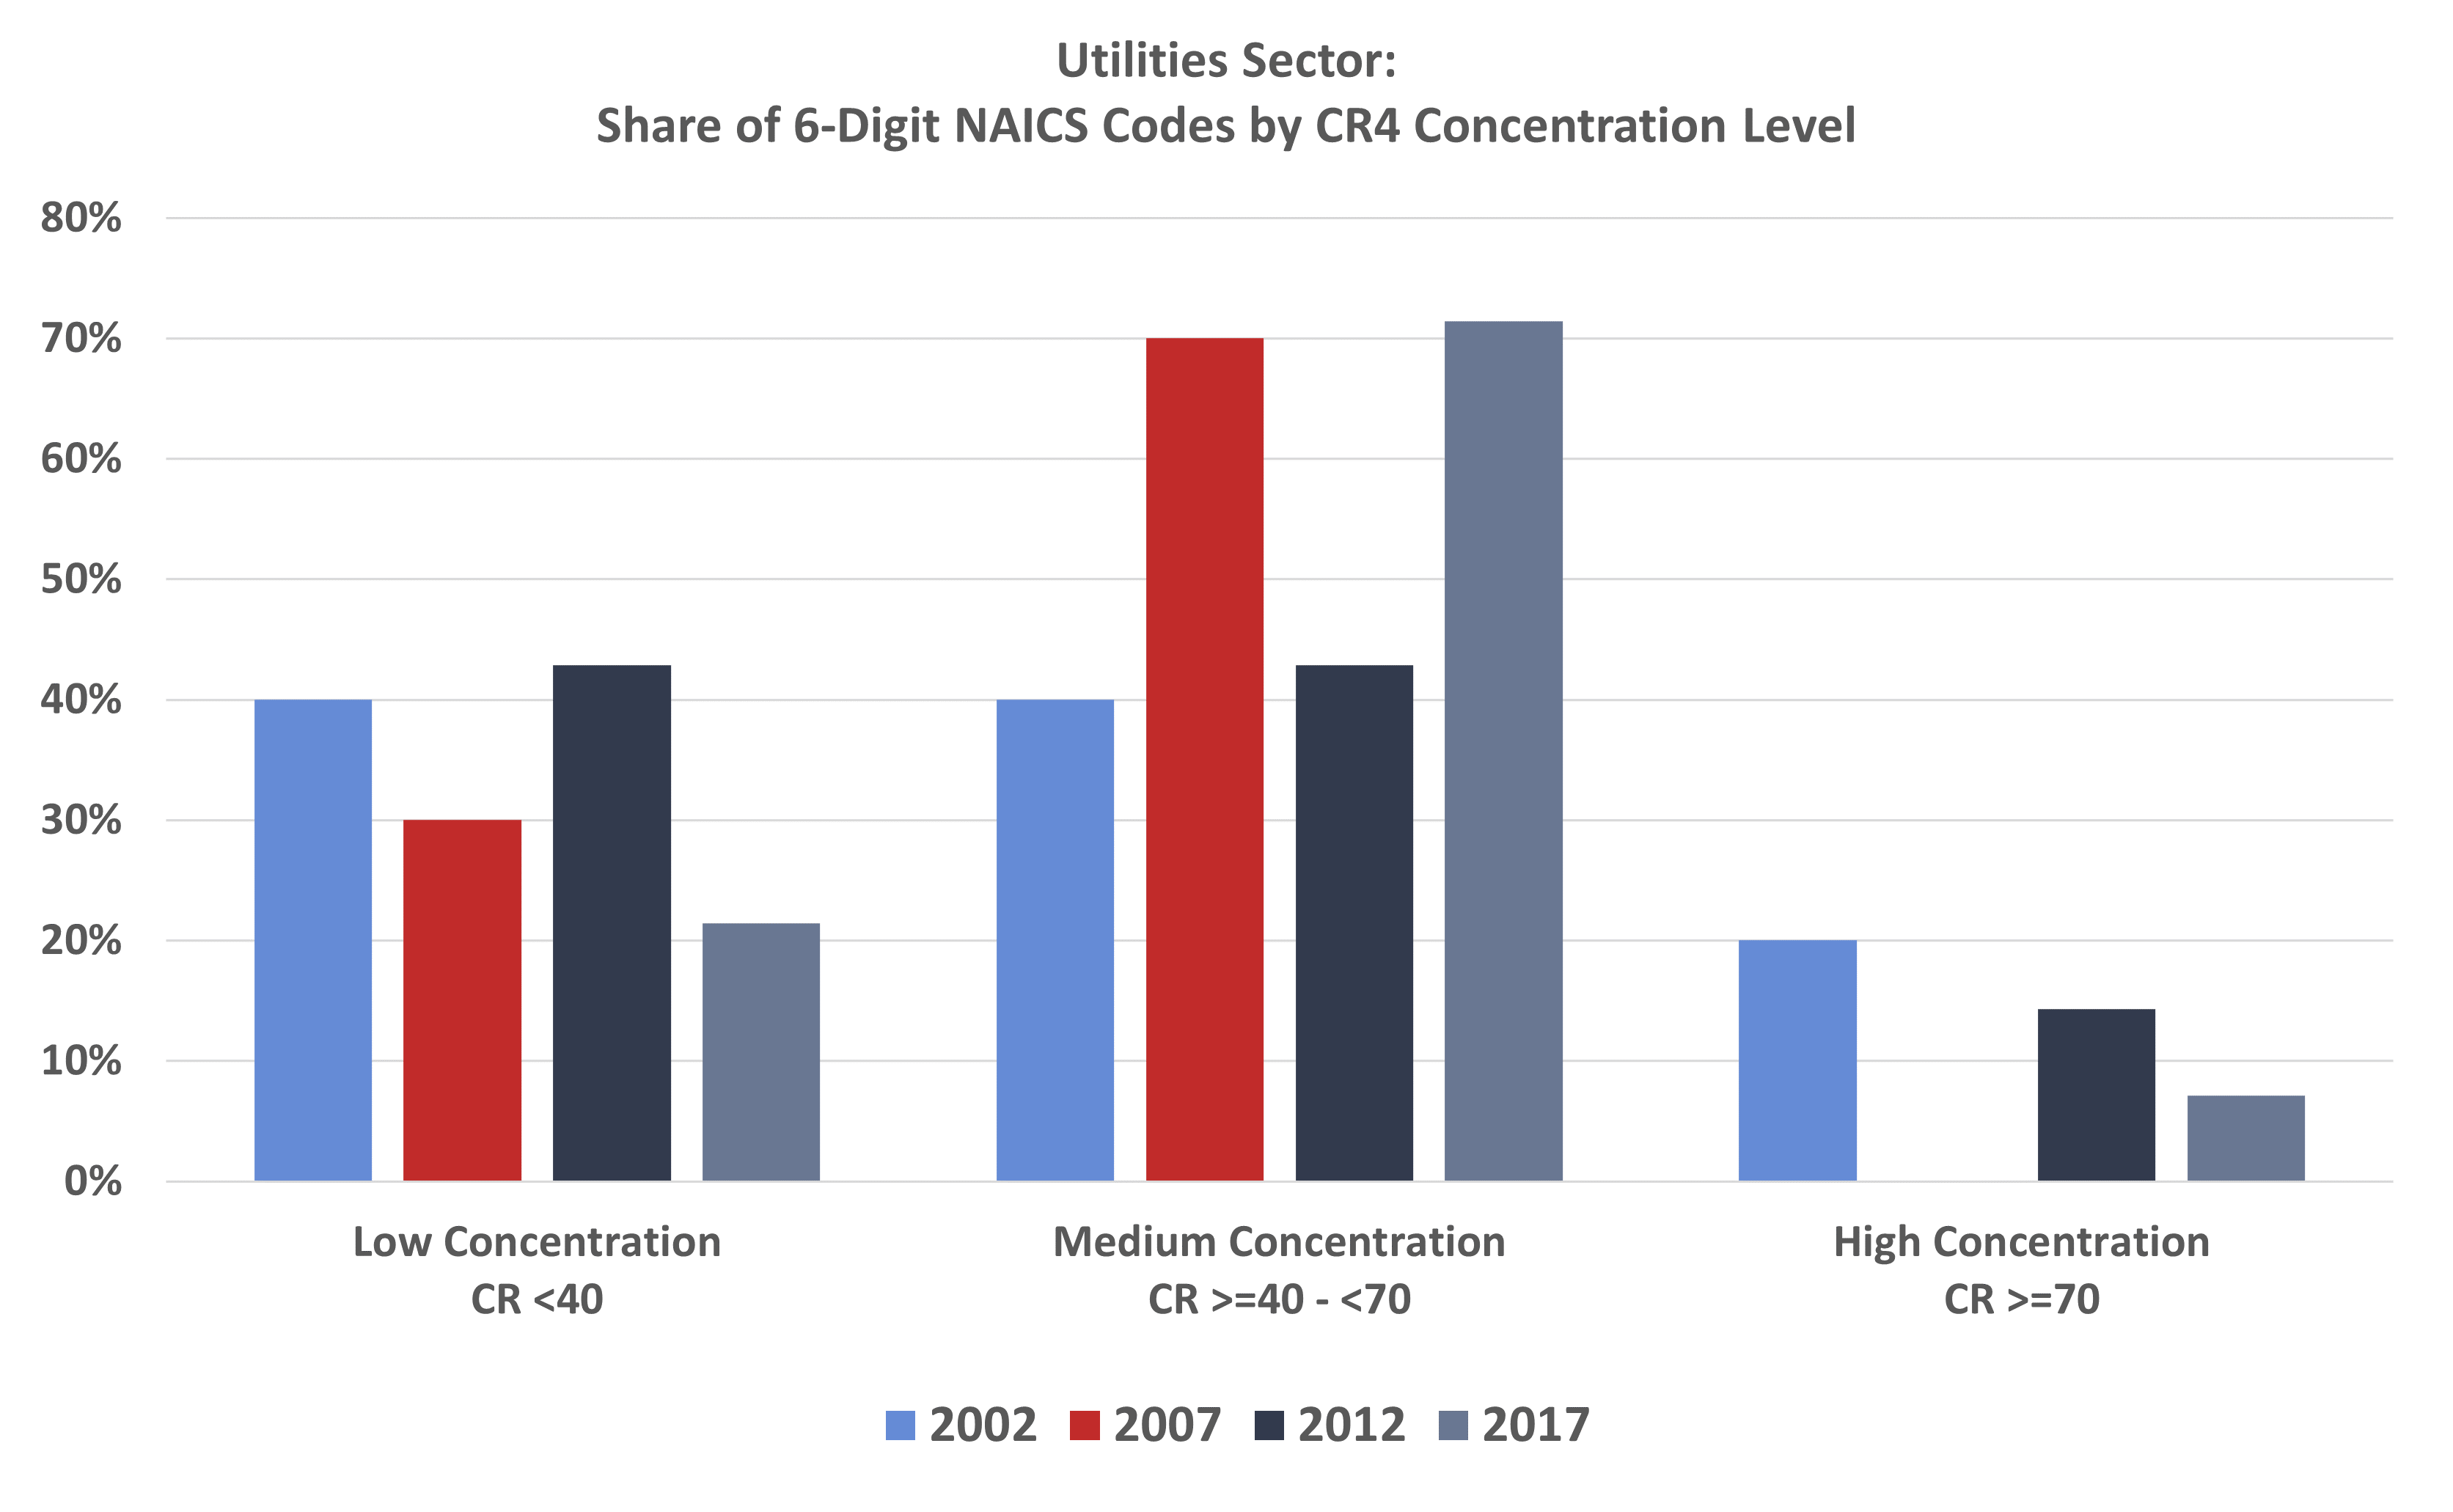 Utilities Sector: Share of 6-Digit NAICS Codes by CR4 Concentration Level